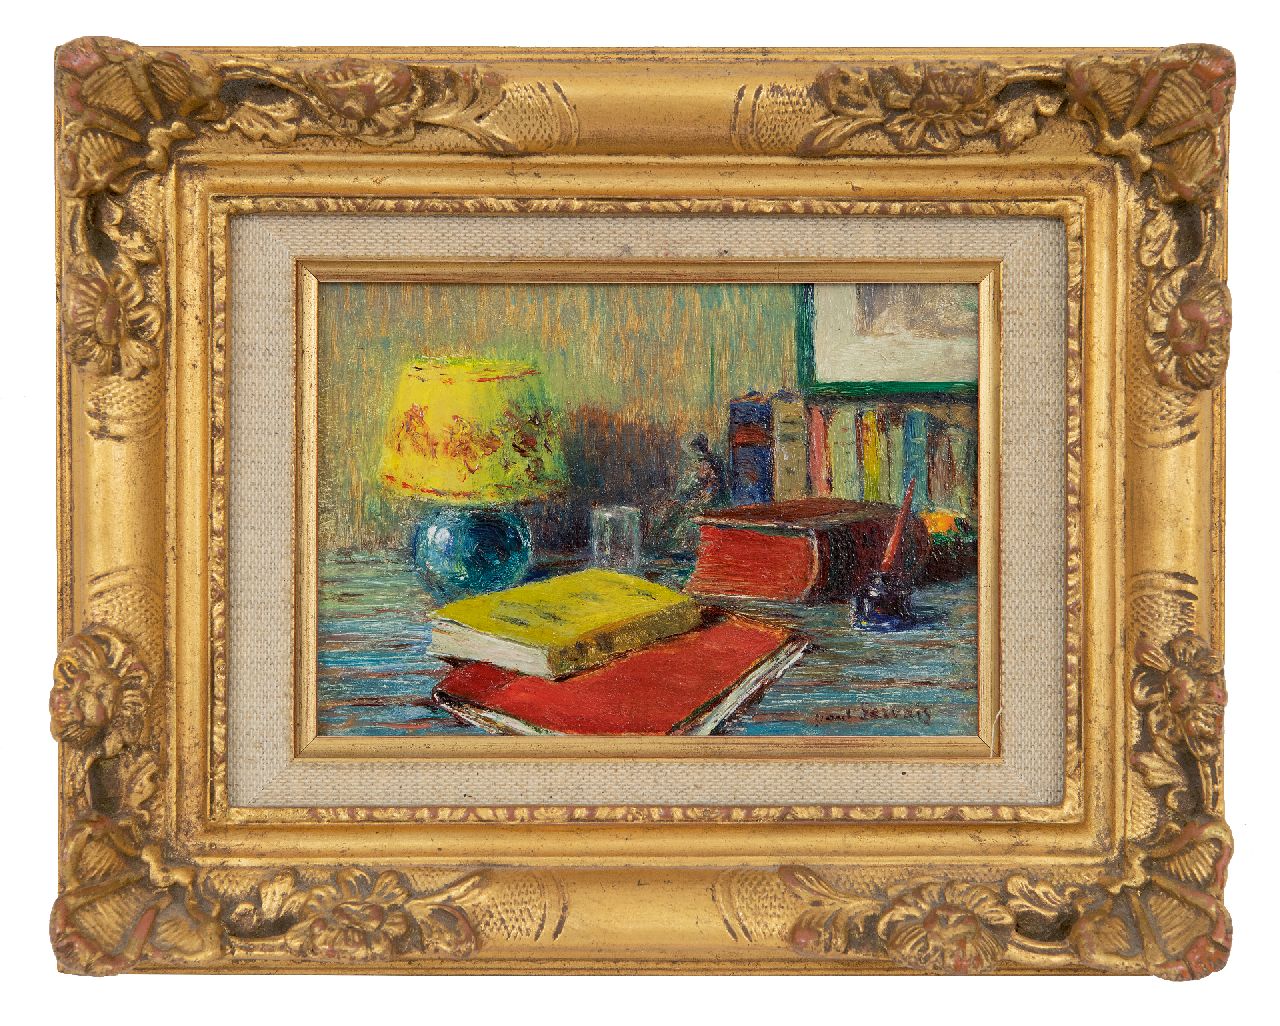 Gervais P.J.L.  | Paul Jean Louis Gervais | Paintings offered for sale | Stillife with books and lamp, oil on panel 10.1 x 14.3 cm, signed l.r.